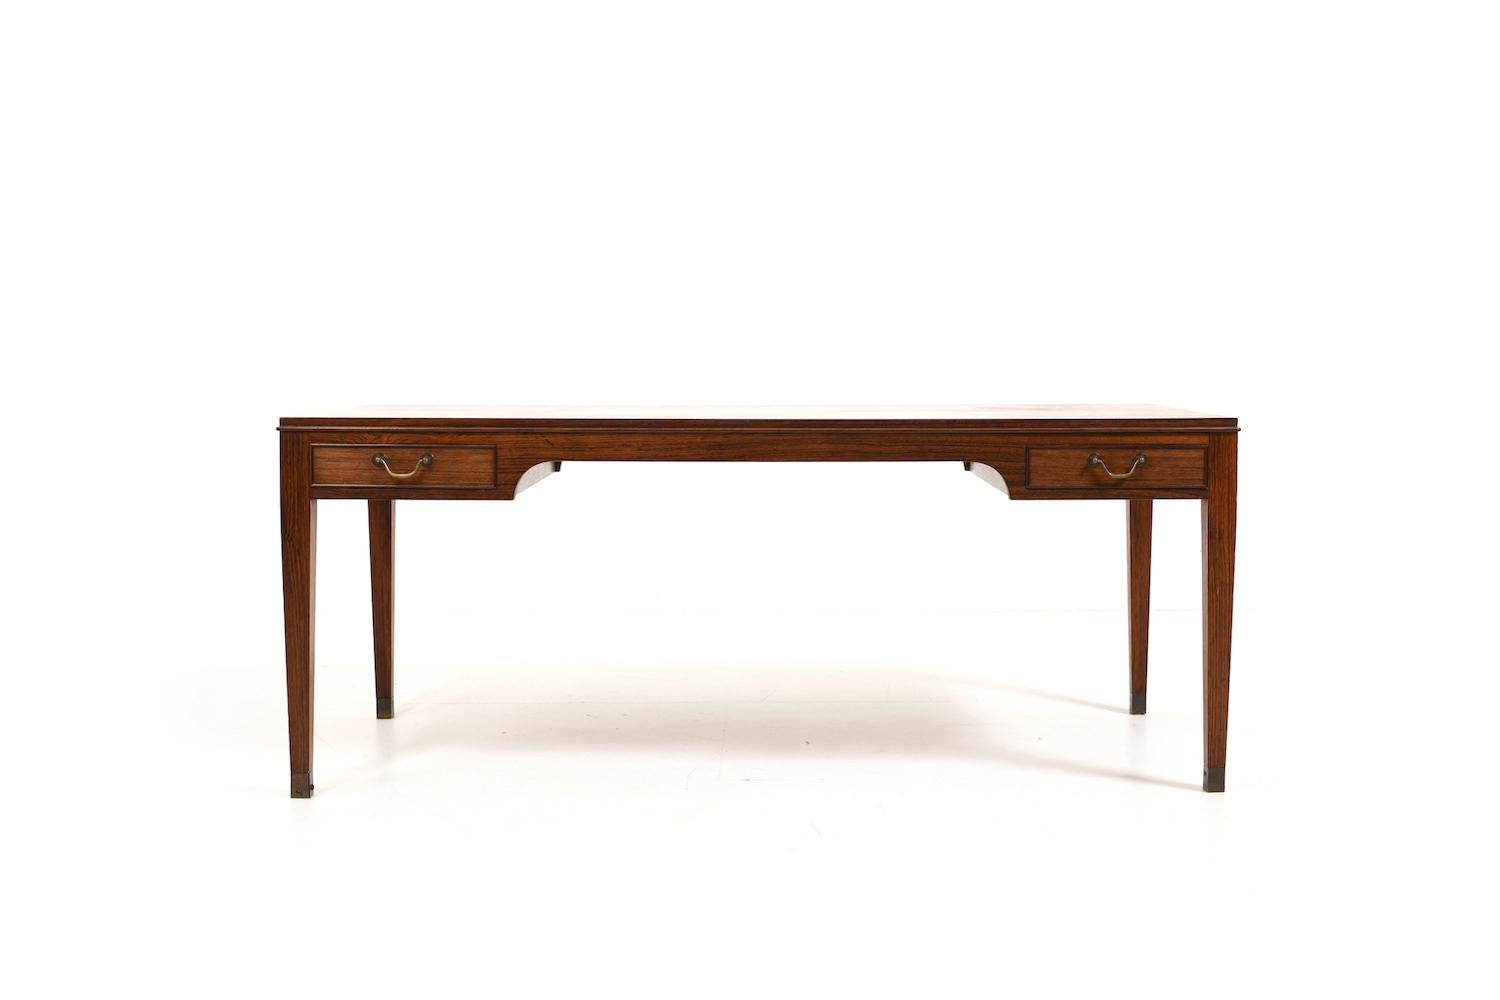 Fine sofa table with 4 drawers (2 each side) and brass shoes and handles. Produced by the famous danish cabinetmaker Frits Henningsen, Copenhagen Denmark. Made in finest wood and quality. 1940s